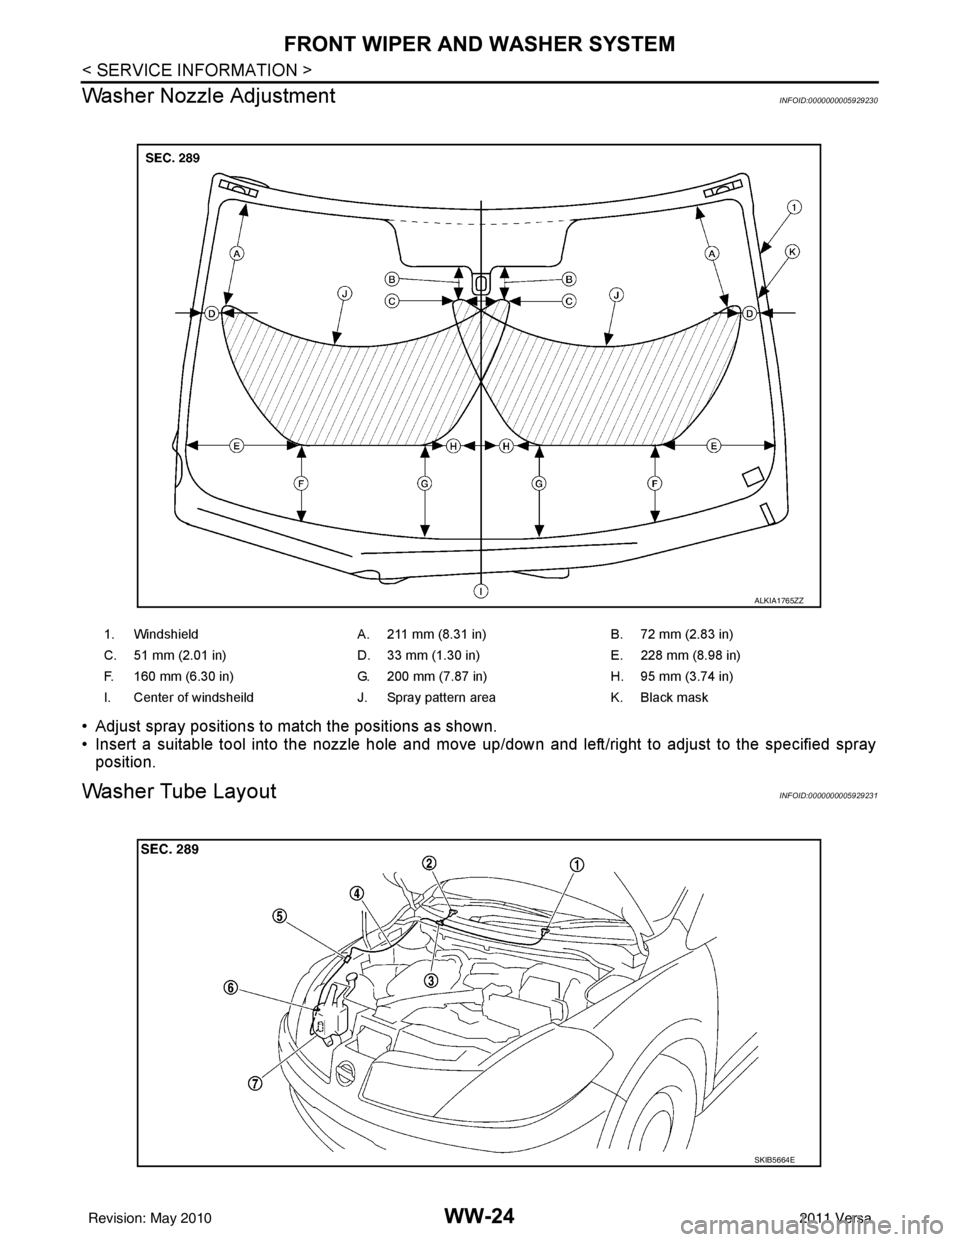 NISSAN LATIO 2011  Service Repair Manual WW-24
< SERVICE INFORMATION >
FRONT WIPER AND WASHER SYSTEM
Washer Nozzle Adjustment
INFOID:0000000005929230
• Adjust spray positions to match the positions as shown.
• Insert a suitable tool into